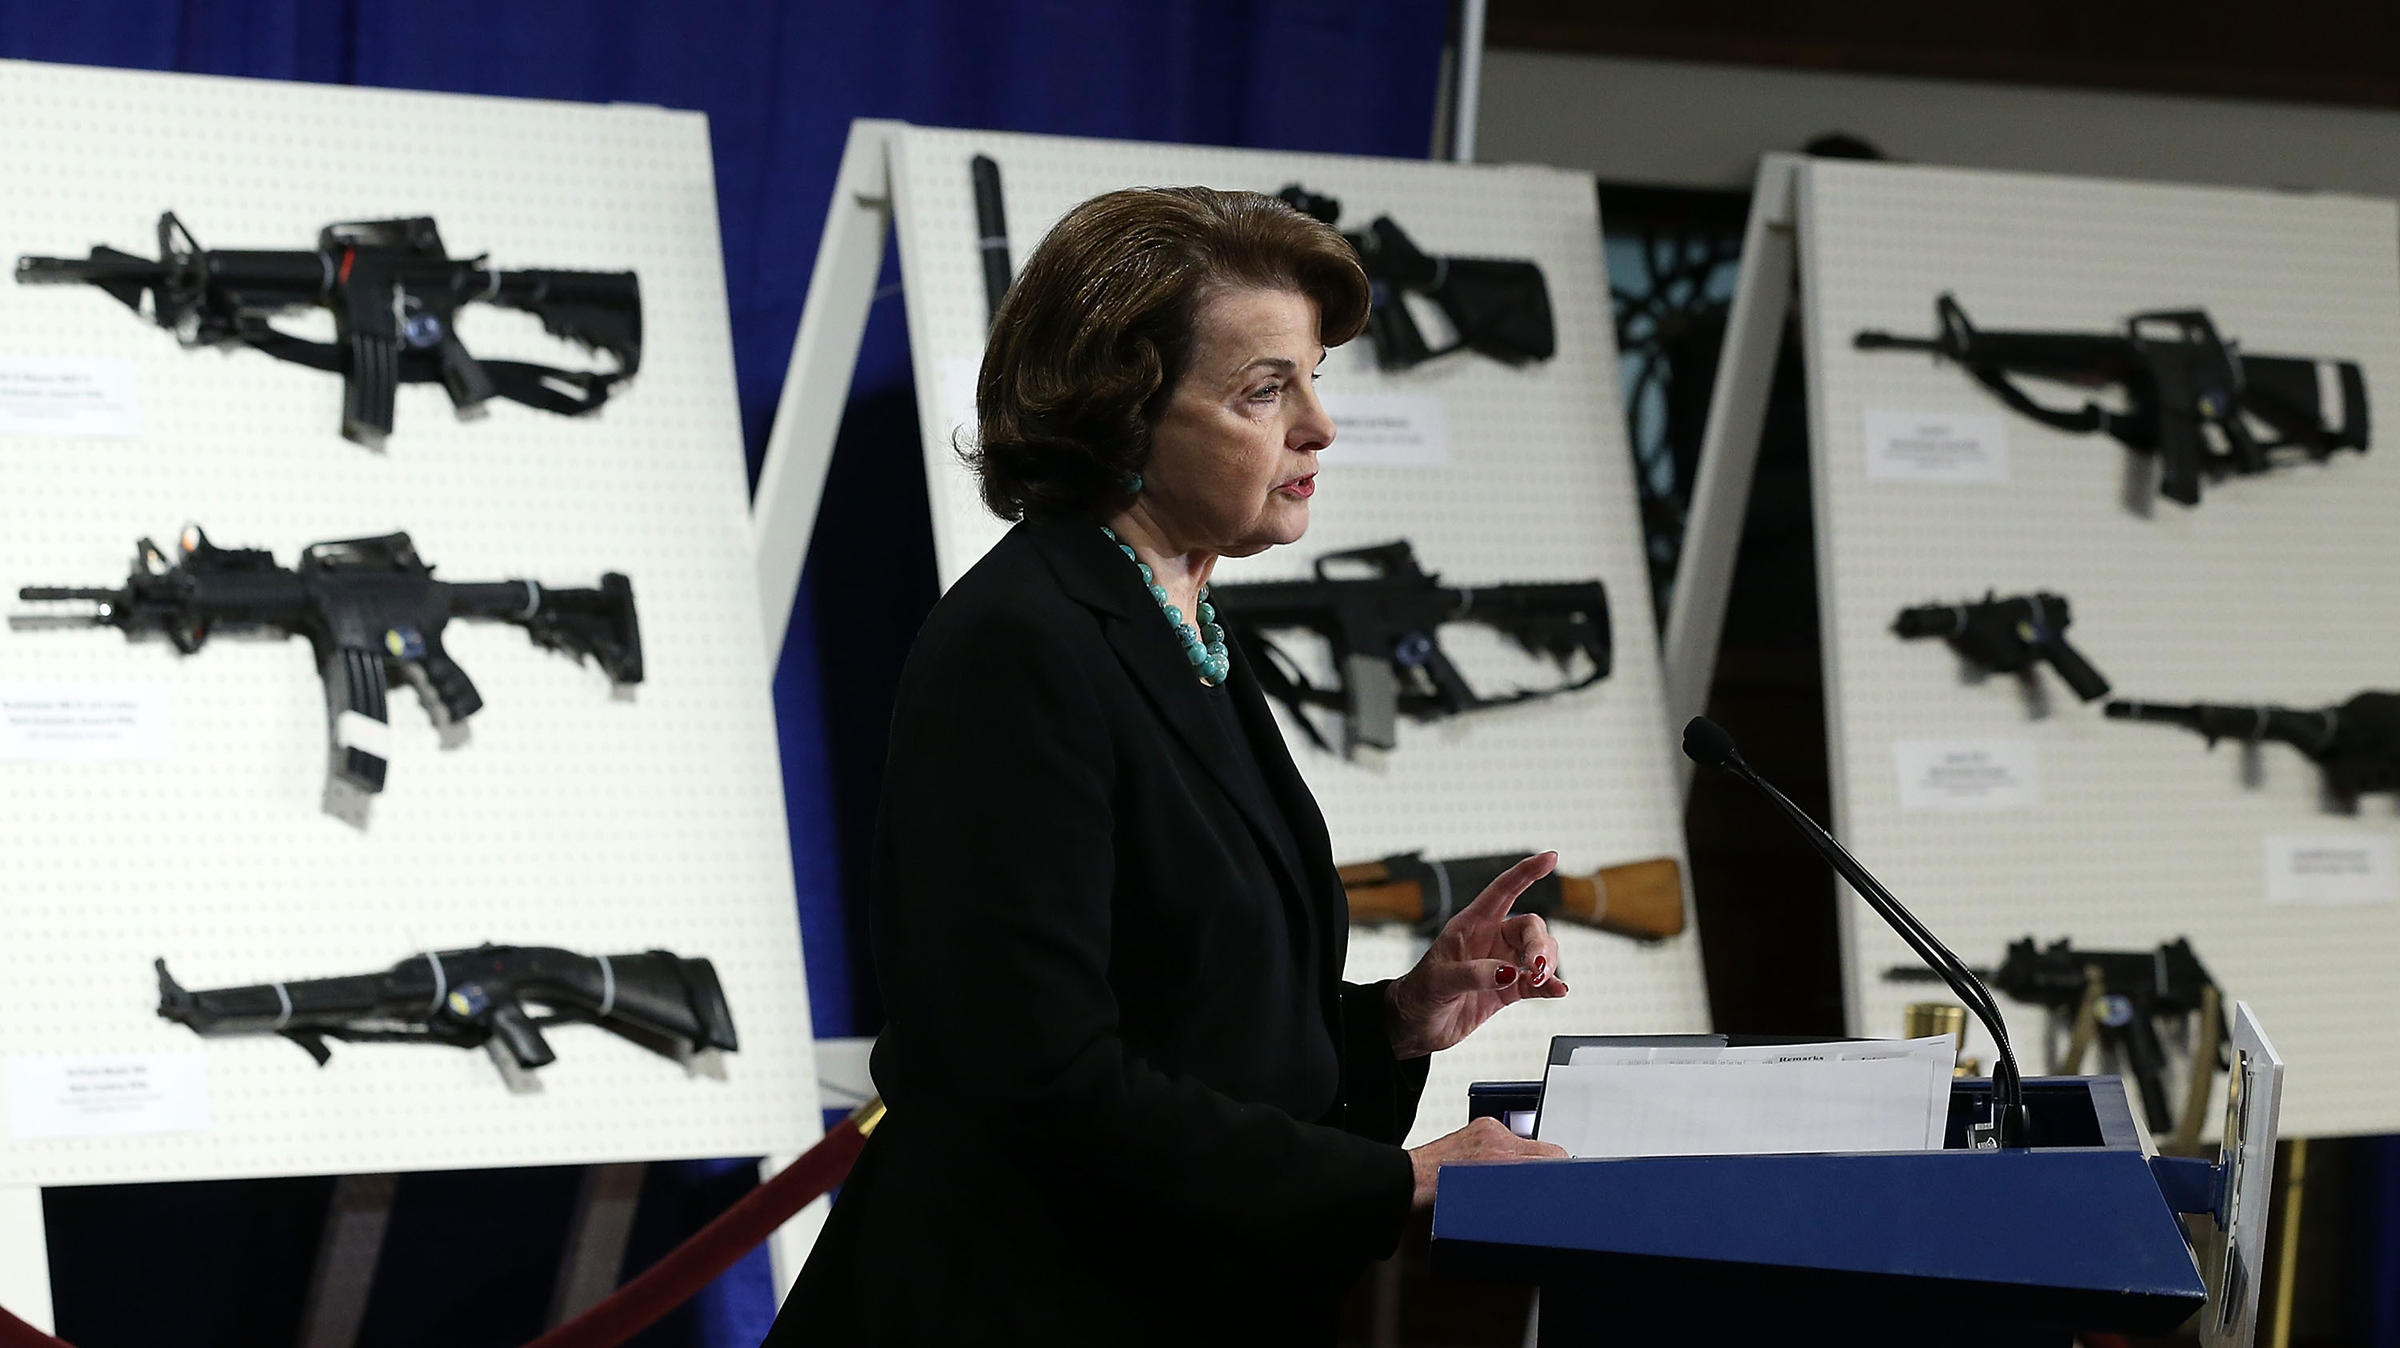 Sponsors Of Assault Weapons Ban Hope Newtown Shooting Changes Minds